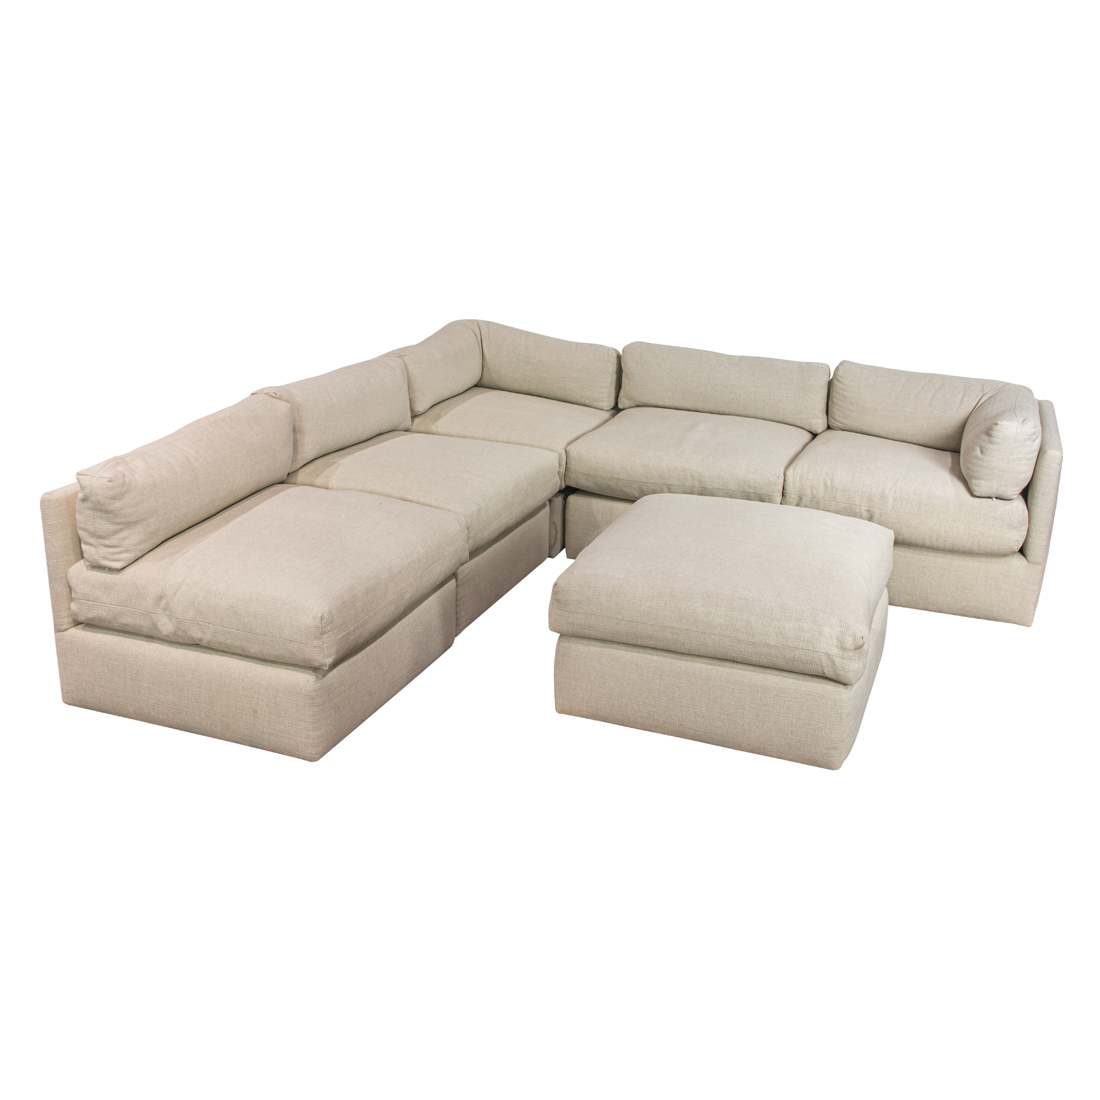 MODERN SECTIONAL SOFA SIX PARTS 3a0dfd